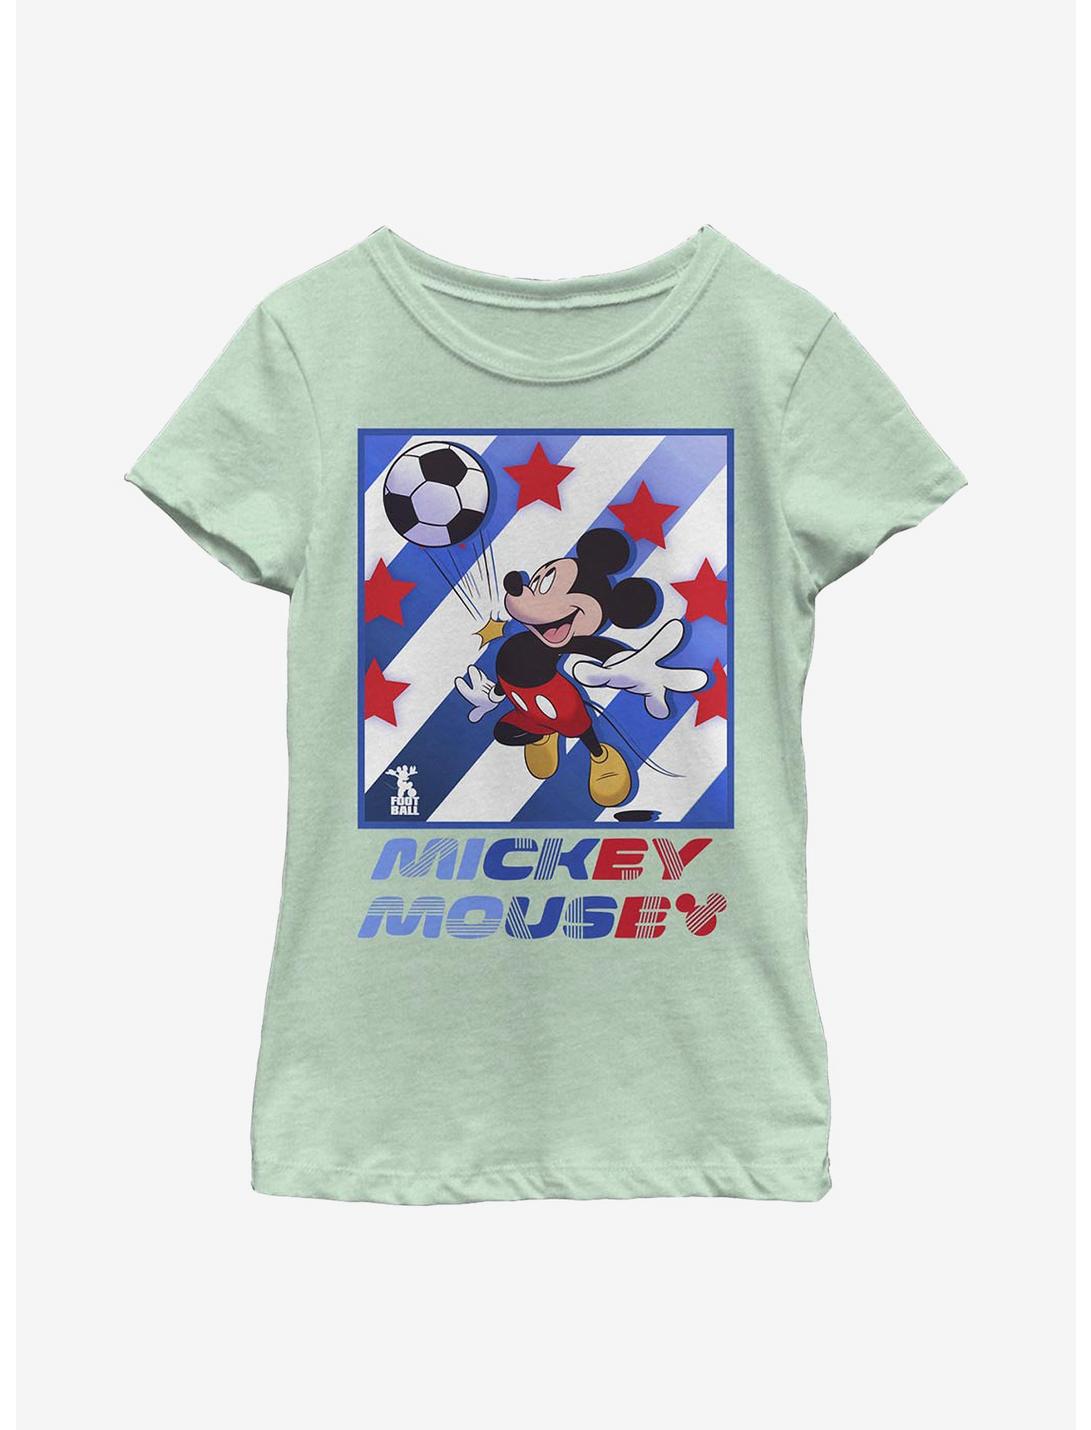 Disney Mickey Mouse Football Star Youth Girls T-Shirt, MINT, hi-res